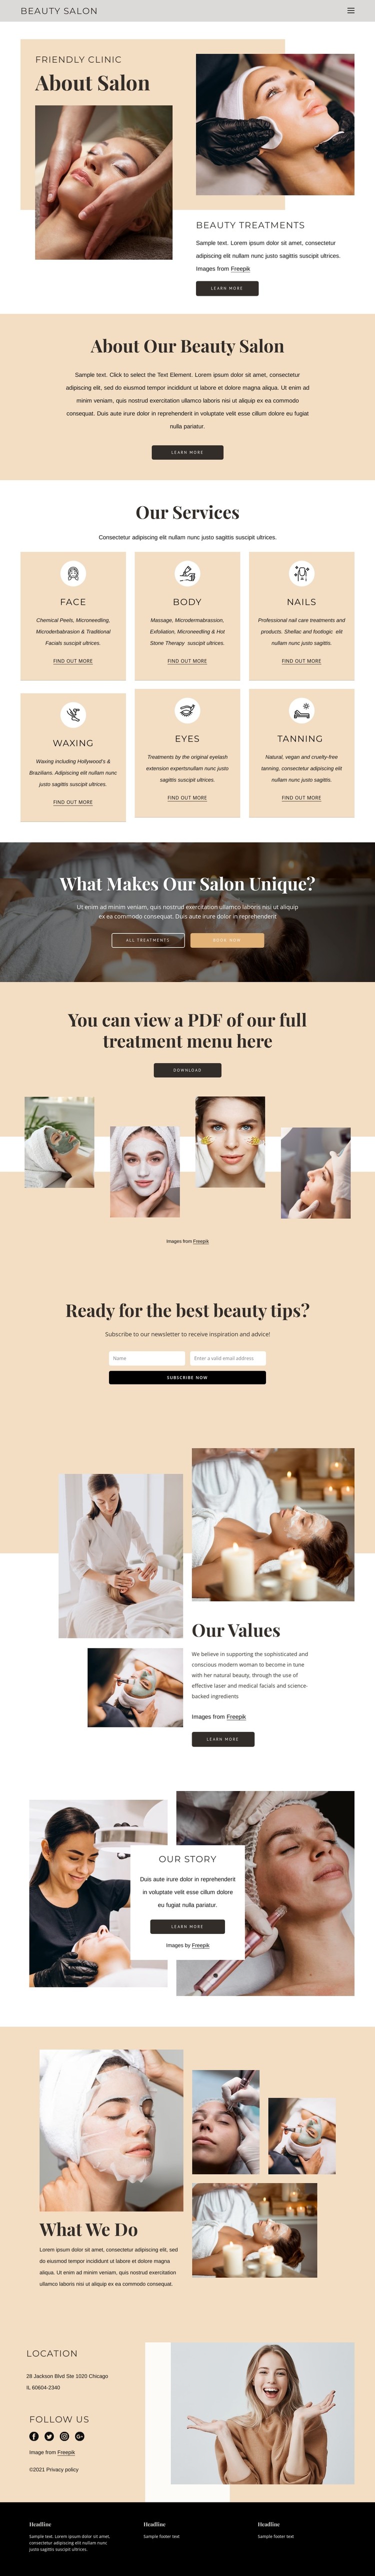 Beauty and aesthetic treatments Static Site Generator